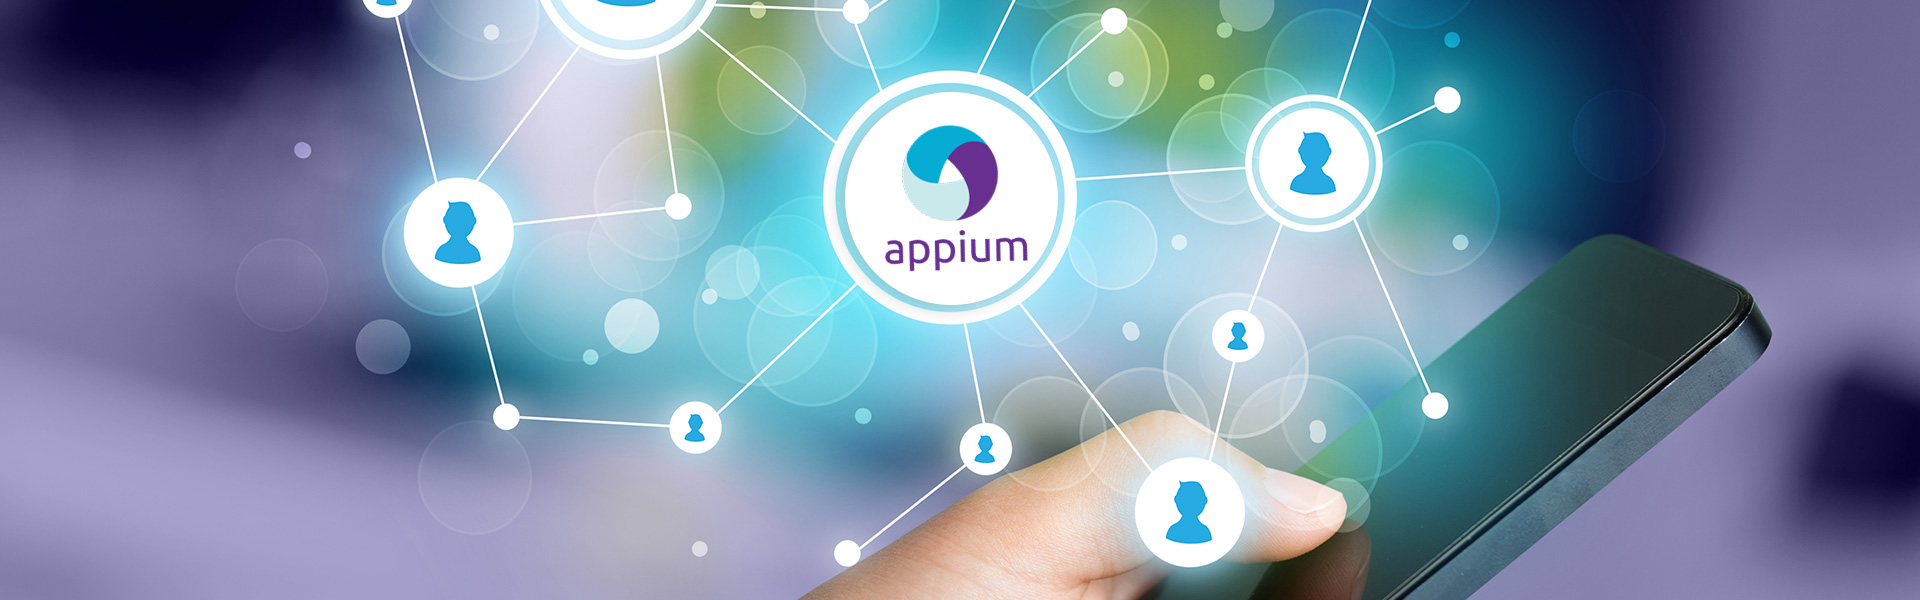 Getting Started With Appium Automation Testing For Android